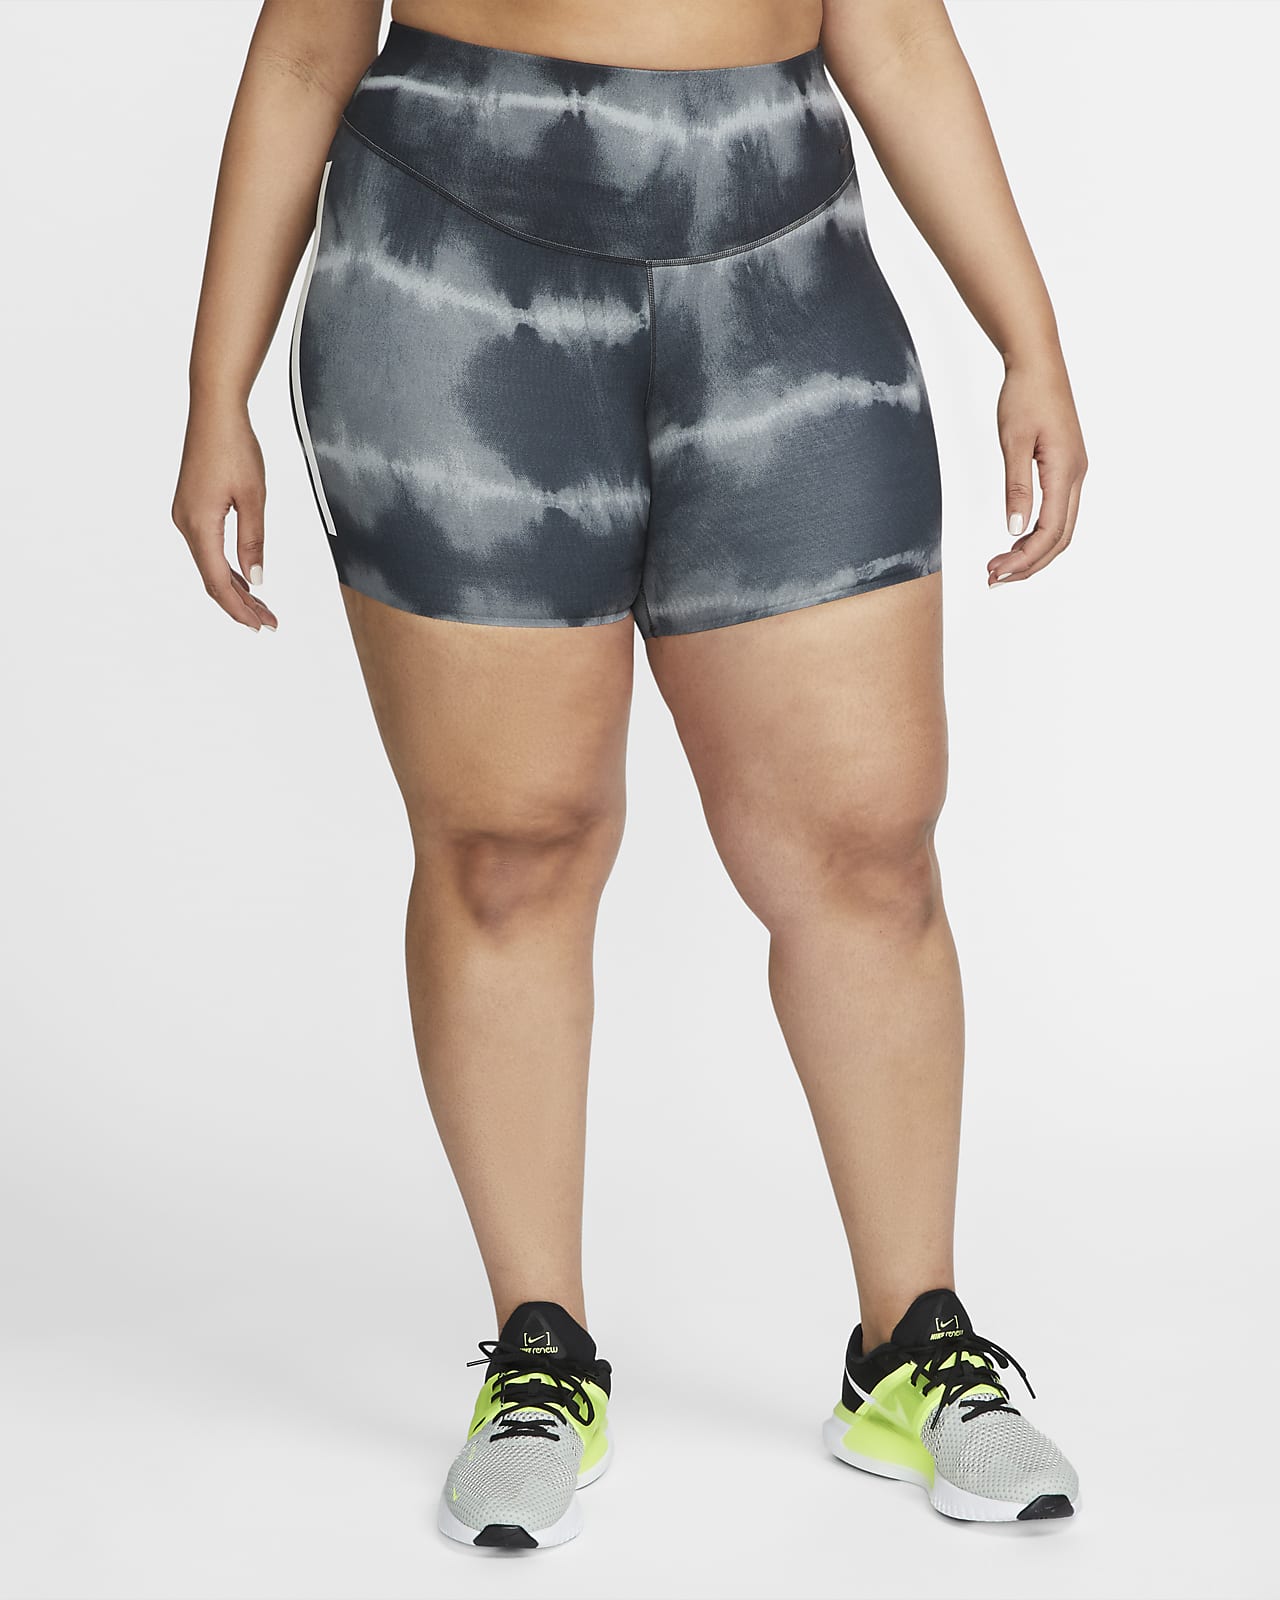 Nike One Luxe Women's 7 Mid-Rise Printed Training Shorts (Plus Size)